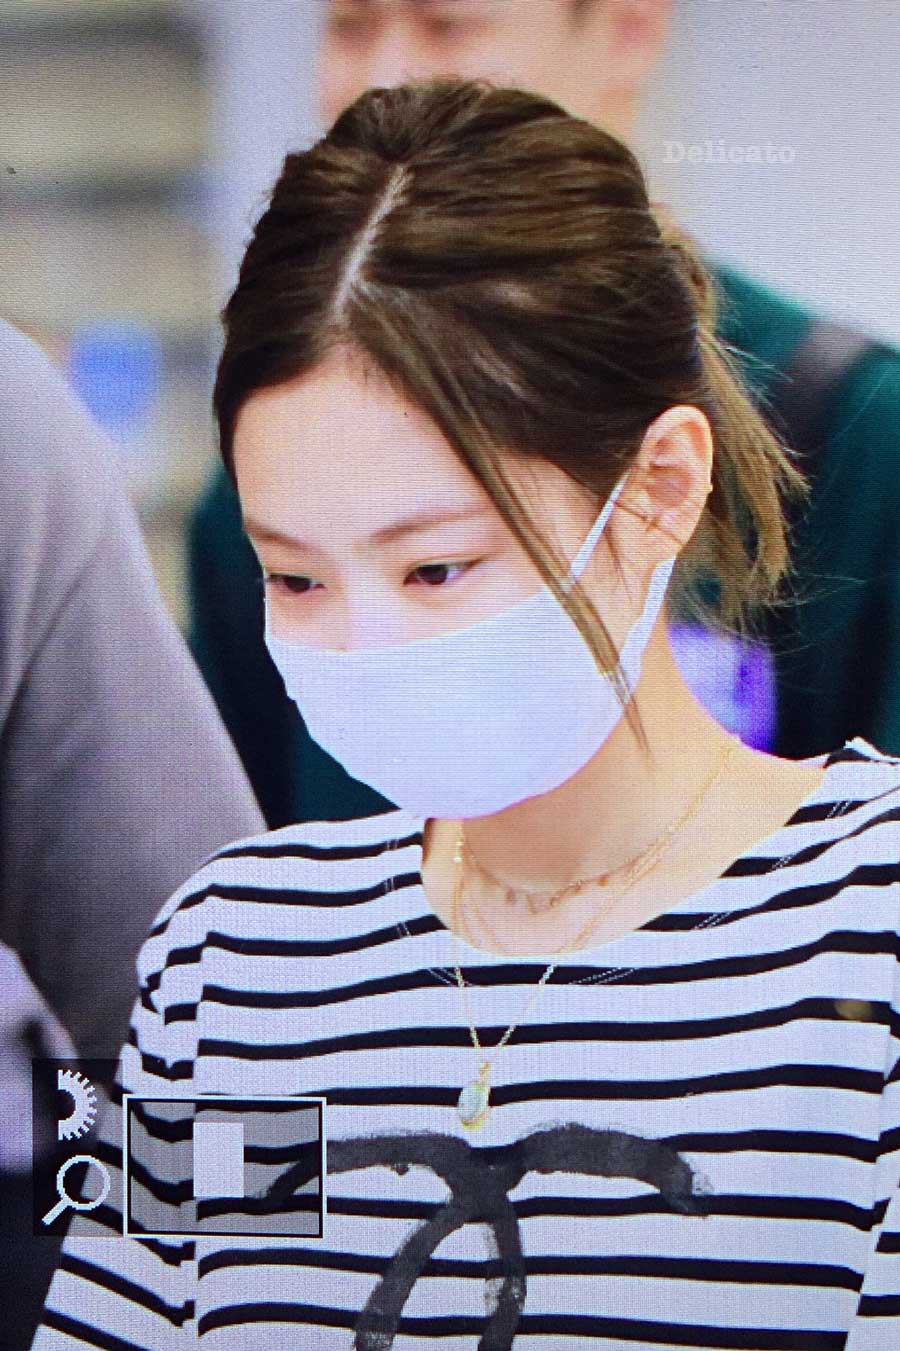 Blackpink Jennie Airport Fashion at Incheon airport 9 June 2018 from Chanel Event France